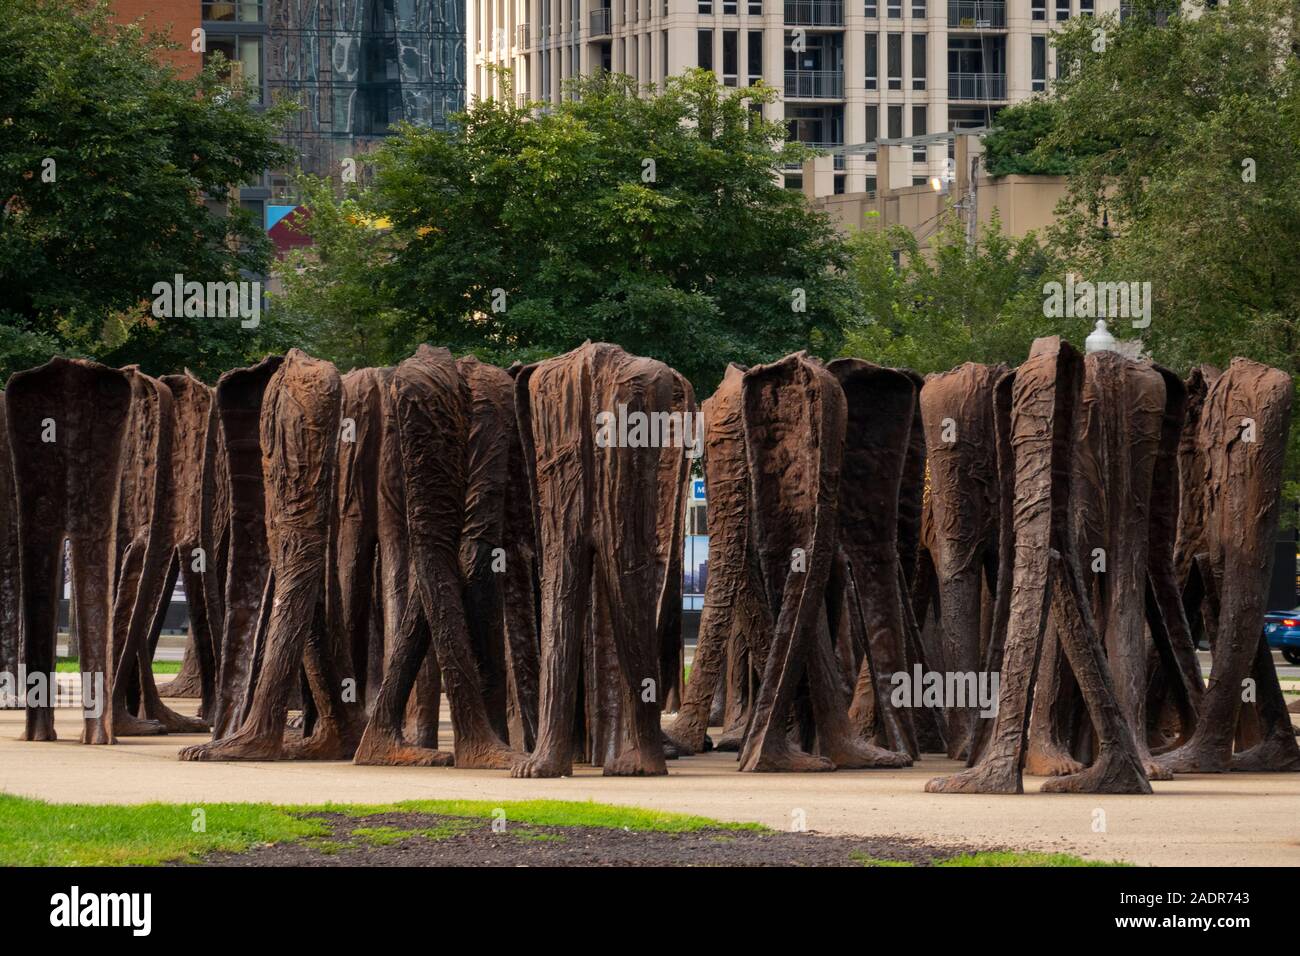 Agora Scultpure (The Giant Legs) in Grant Park, Chicago